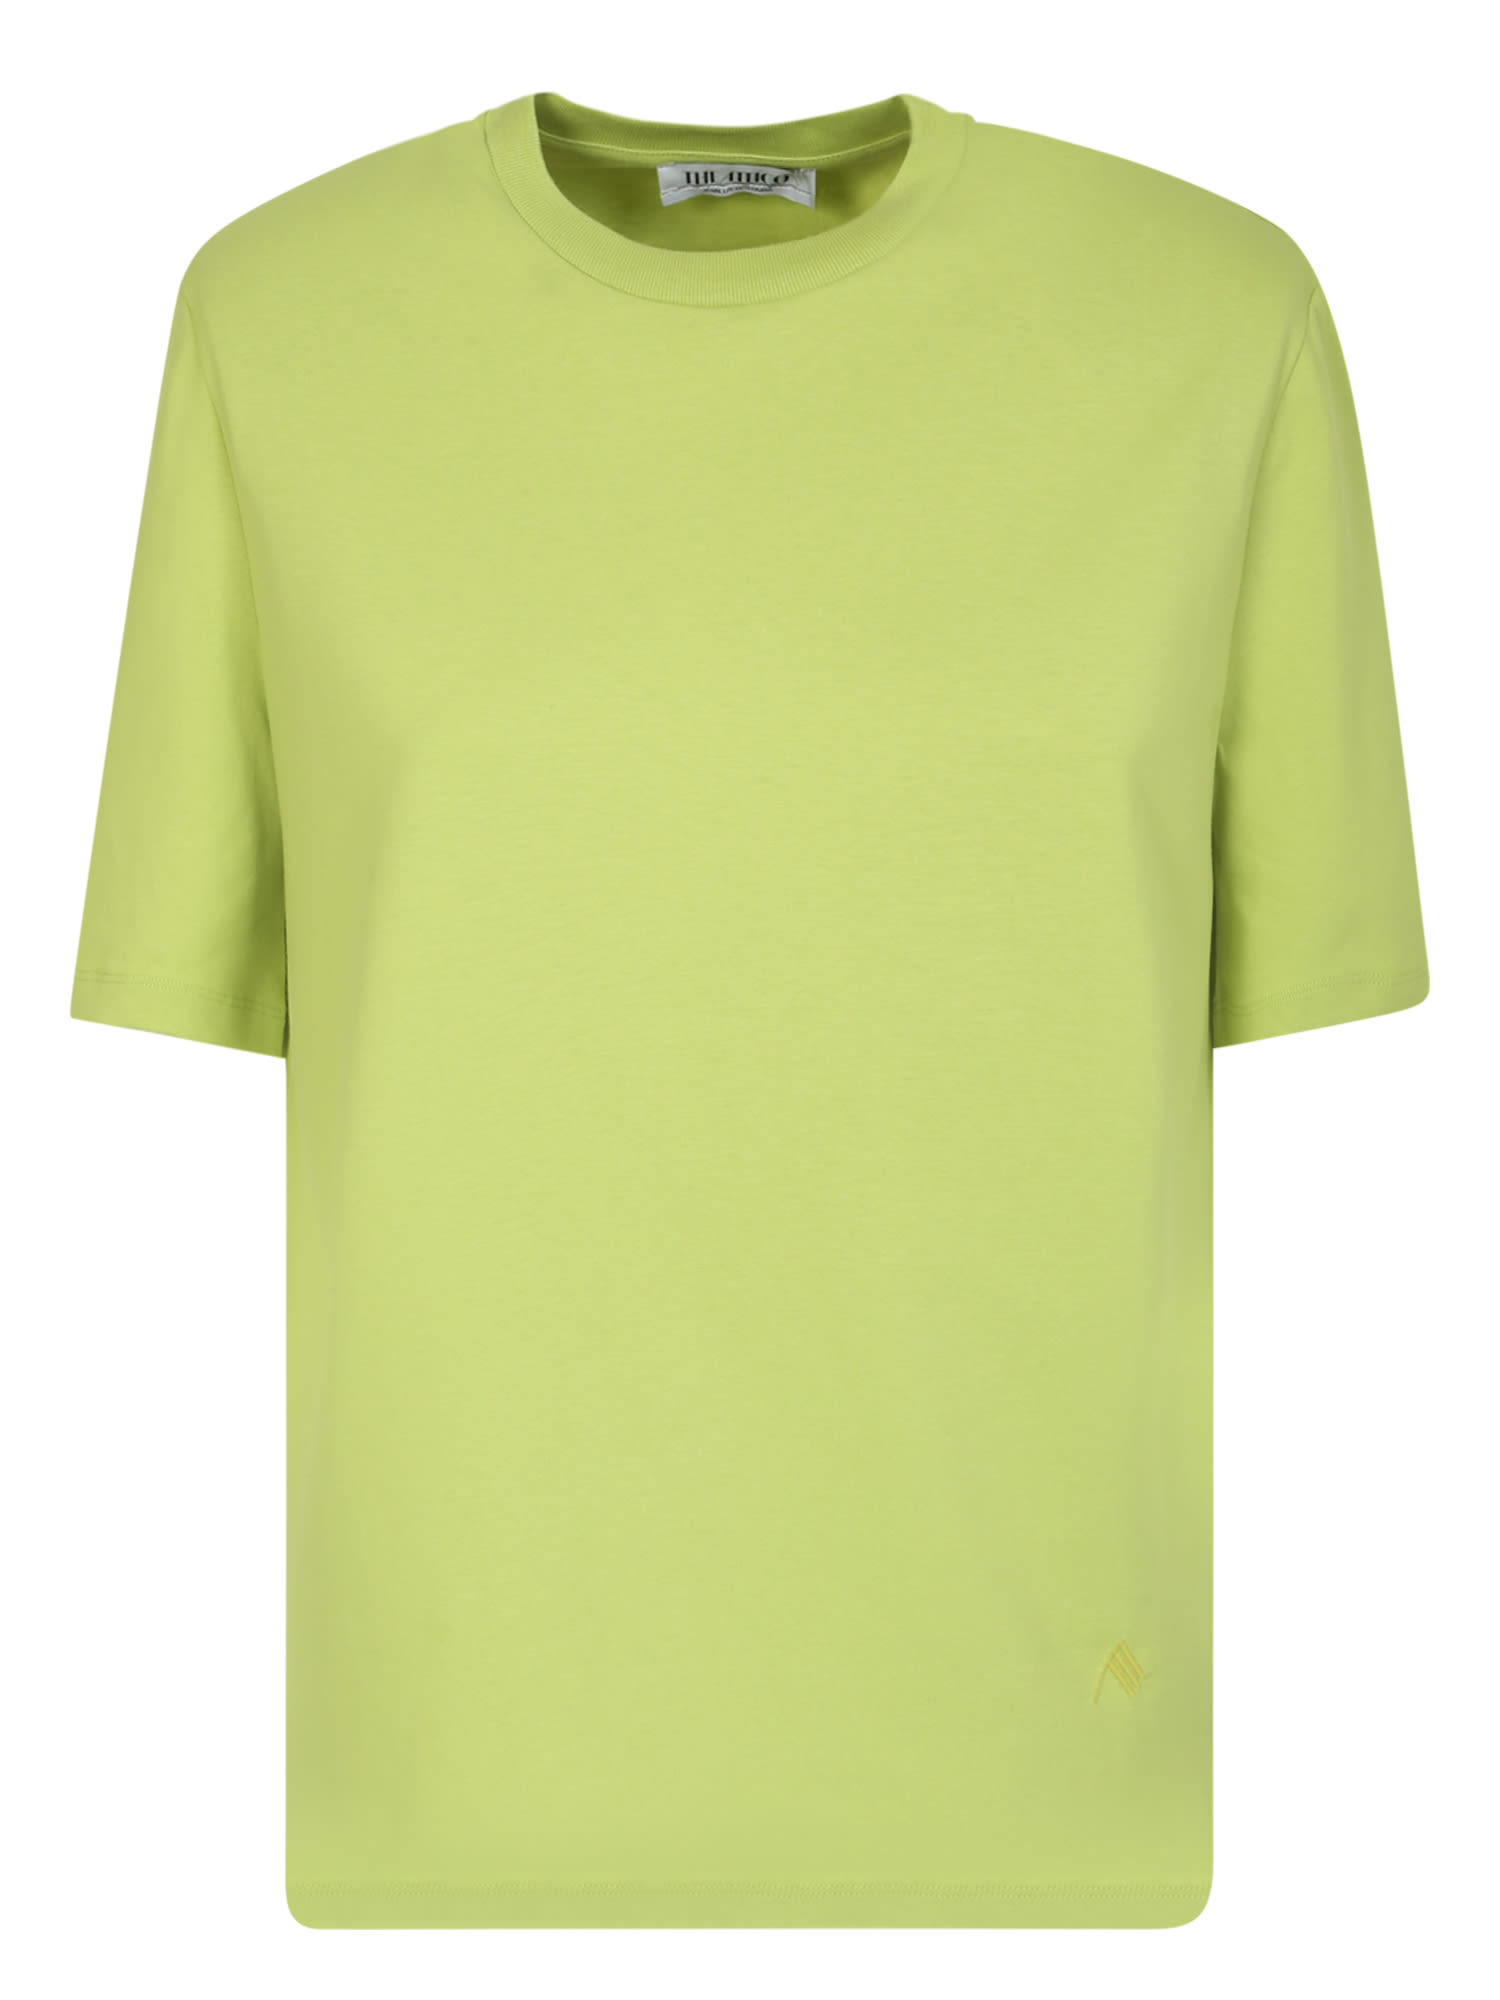 This Round-neck T-shirt From The Attico Is Finished With Shoulder Pads For Added Structure